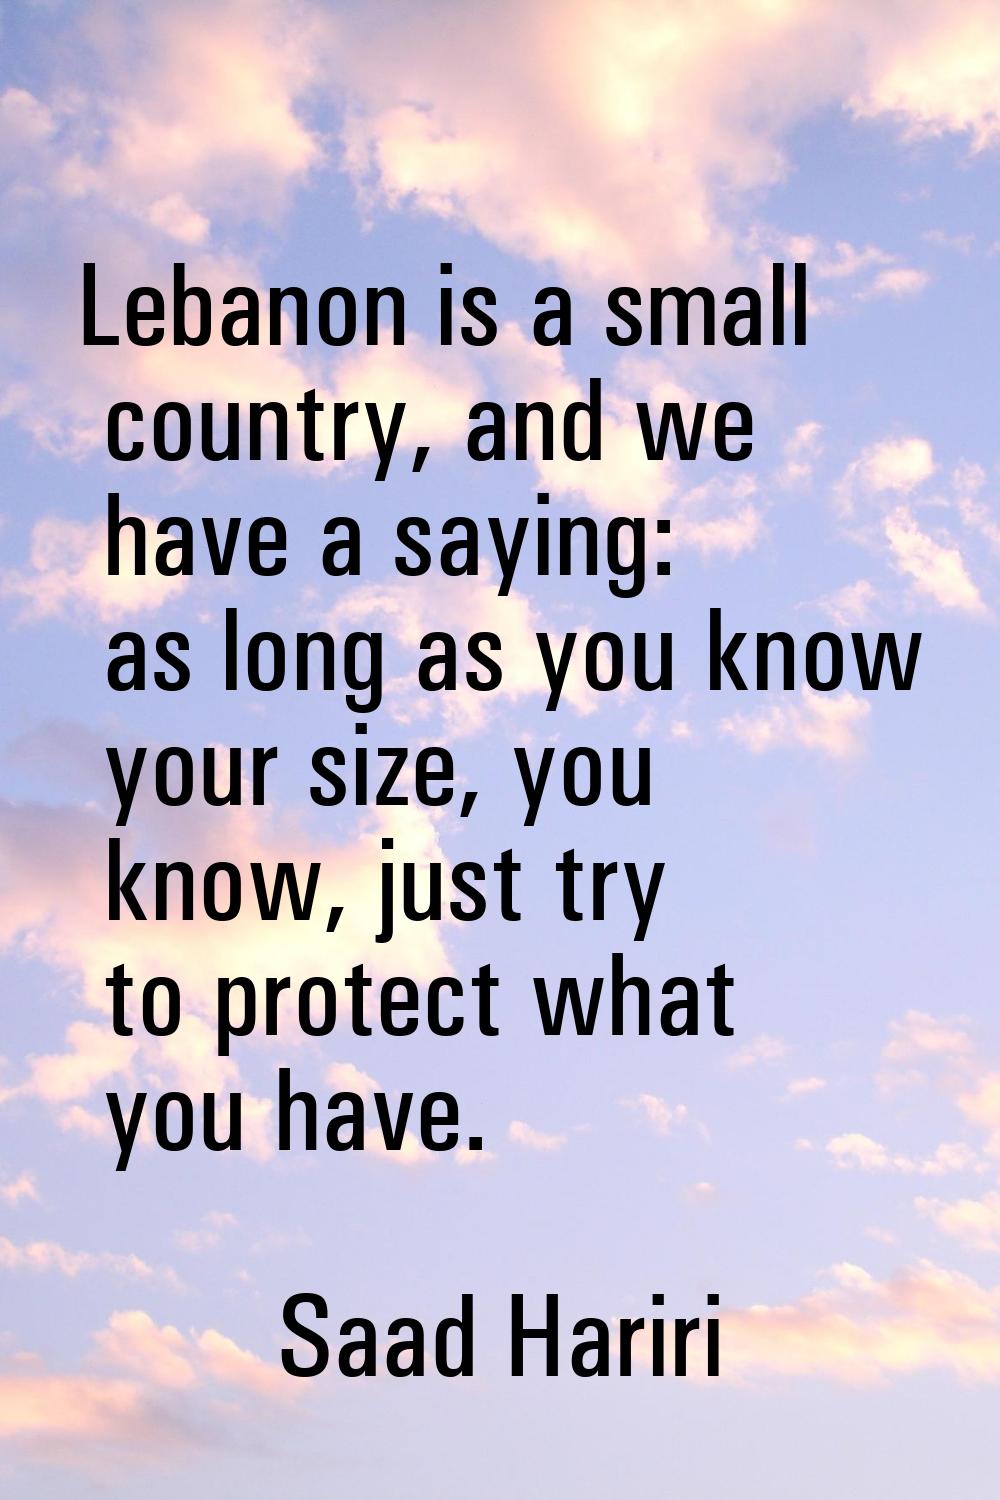 Lebanon is a small country, and we have a saying: as long as you know your size, you know, just try